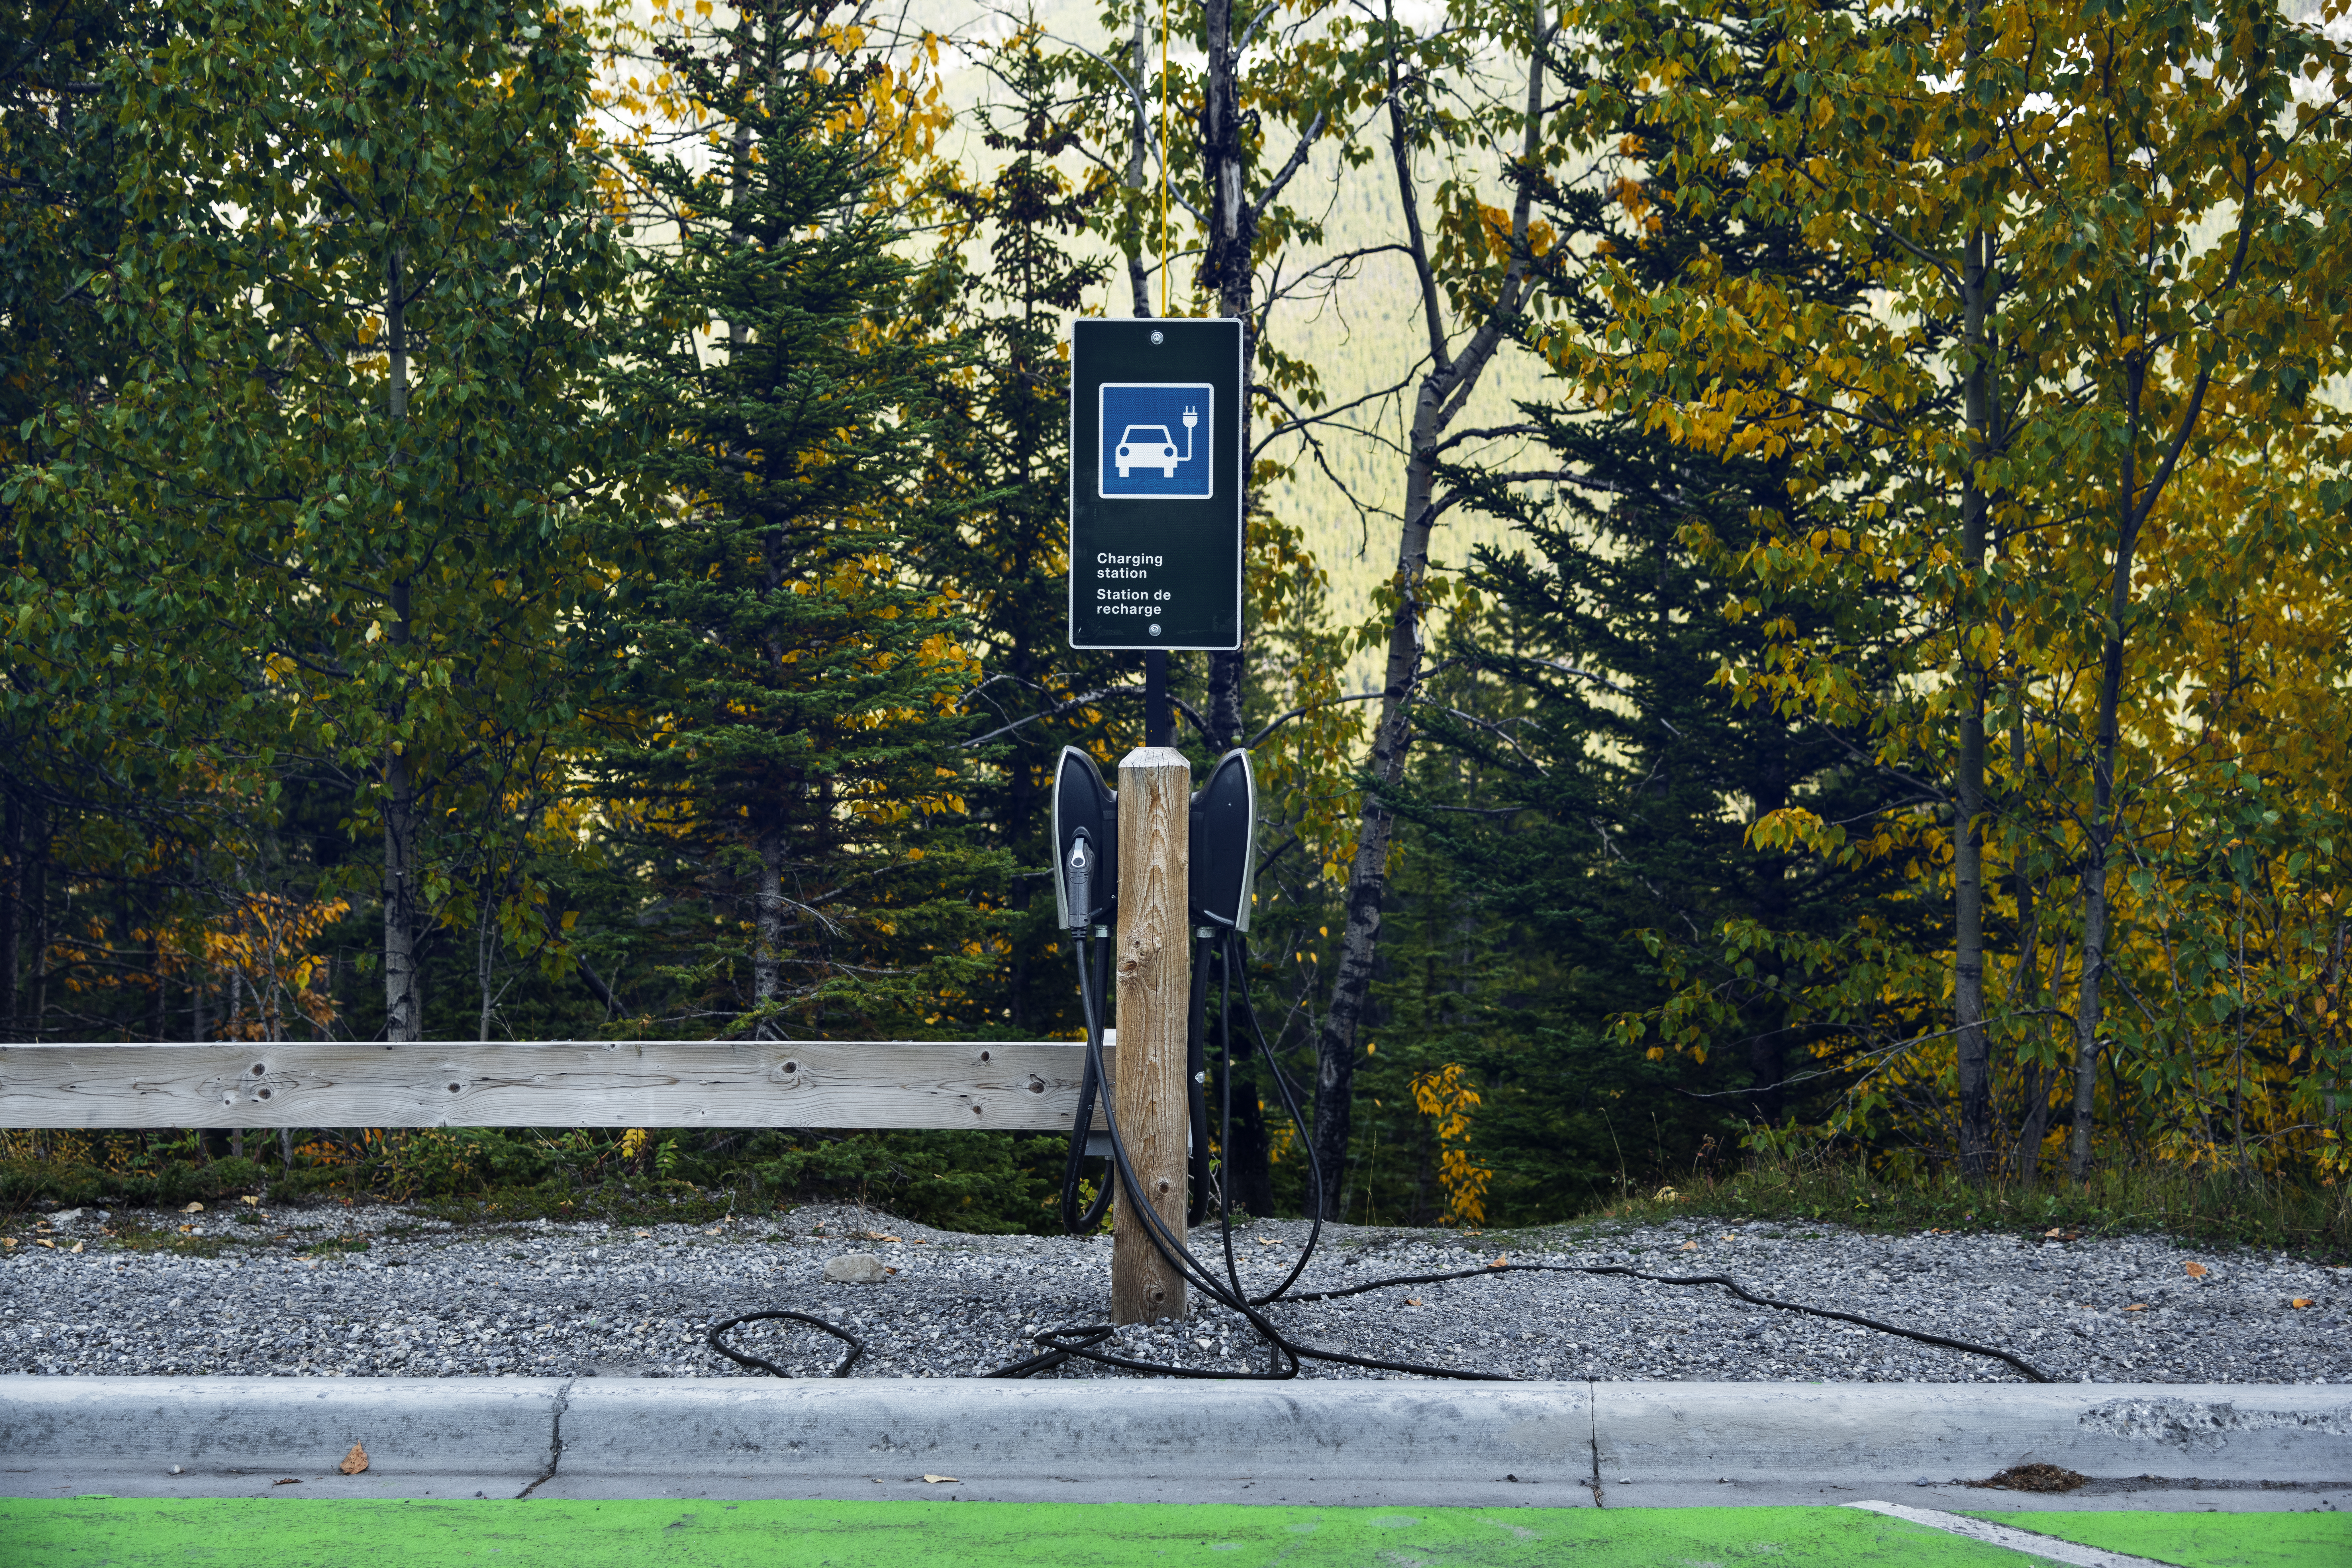 A lonely EV charging station